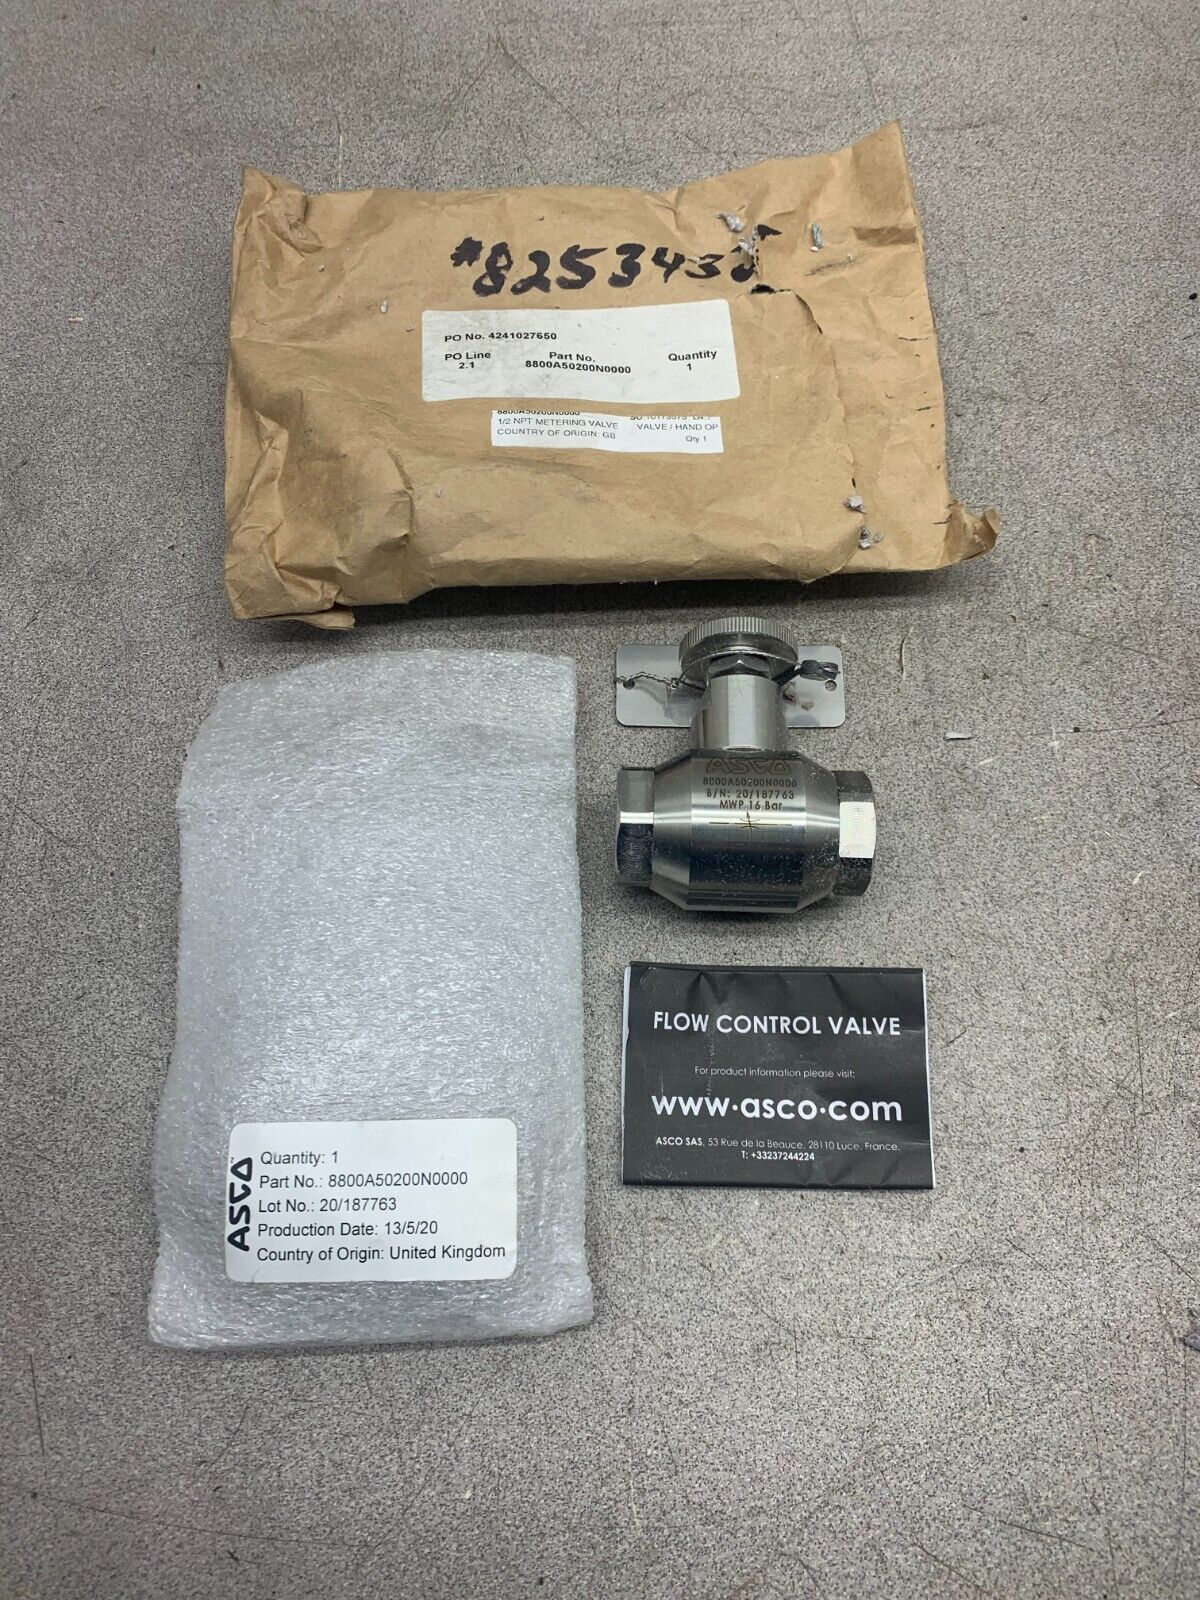 NEW ASCO 1/2 NPT METERING VALVE / HAND OPERATED 8800A50200N0000